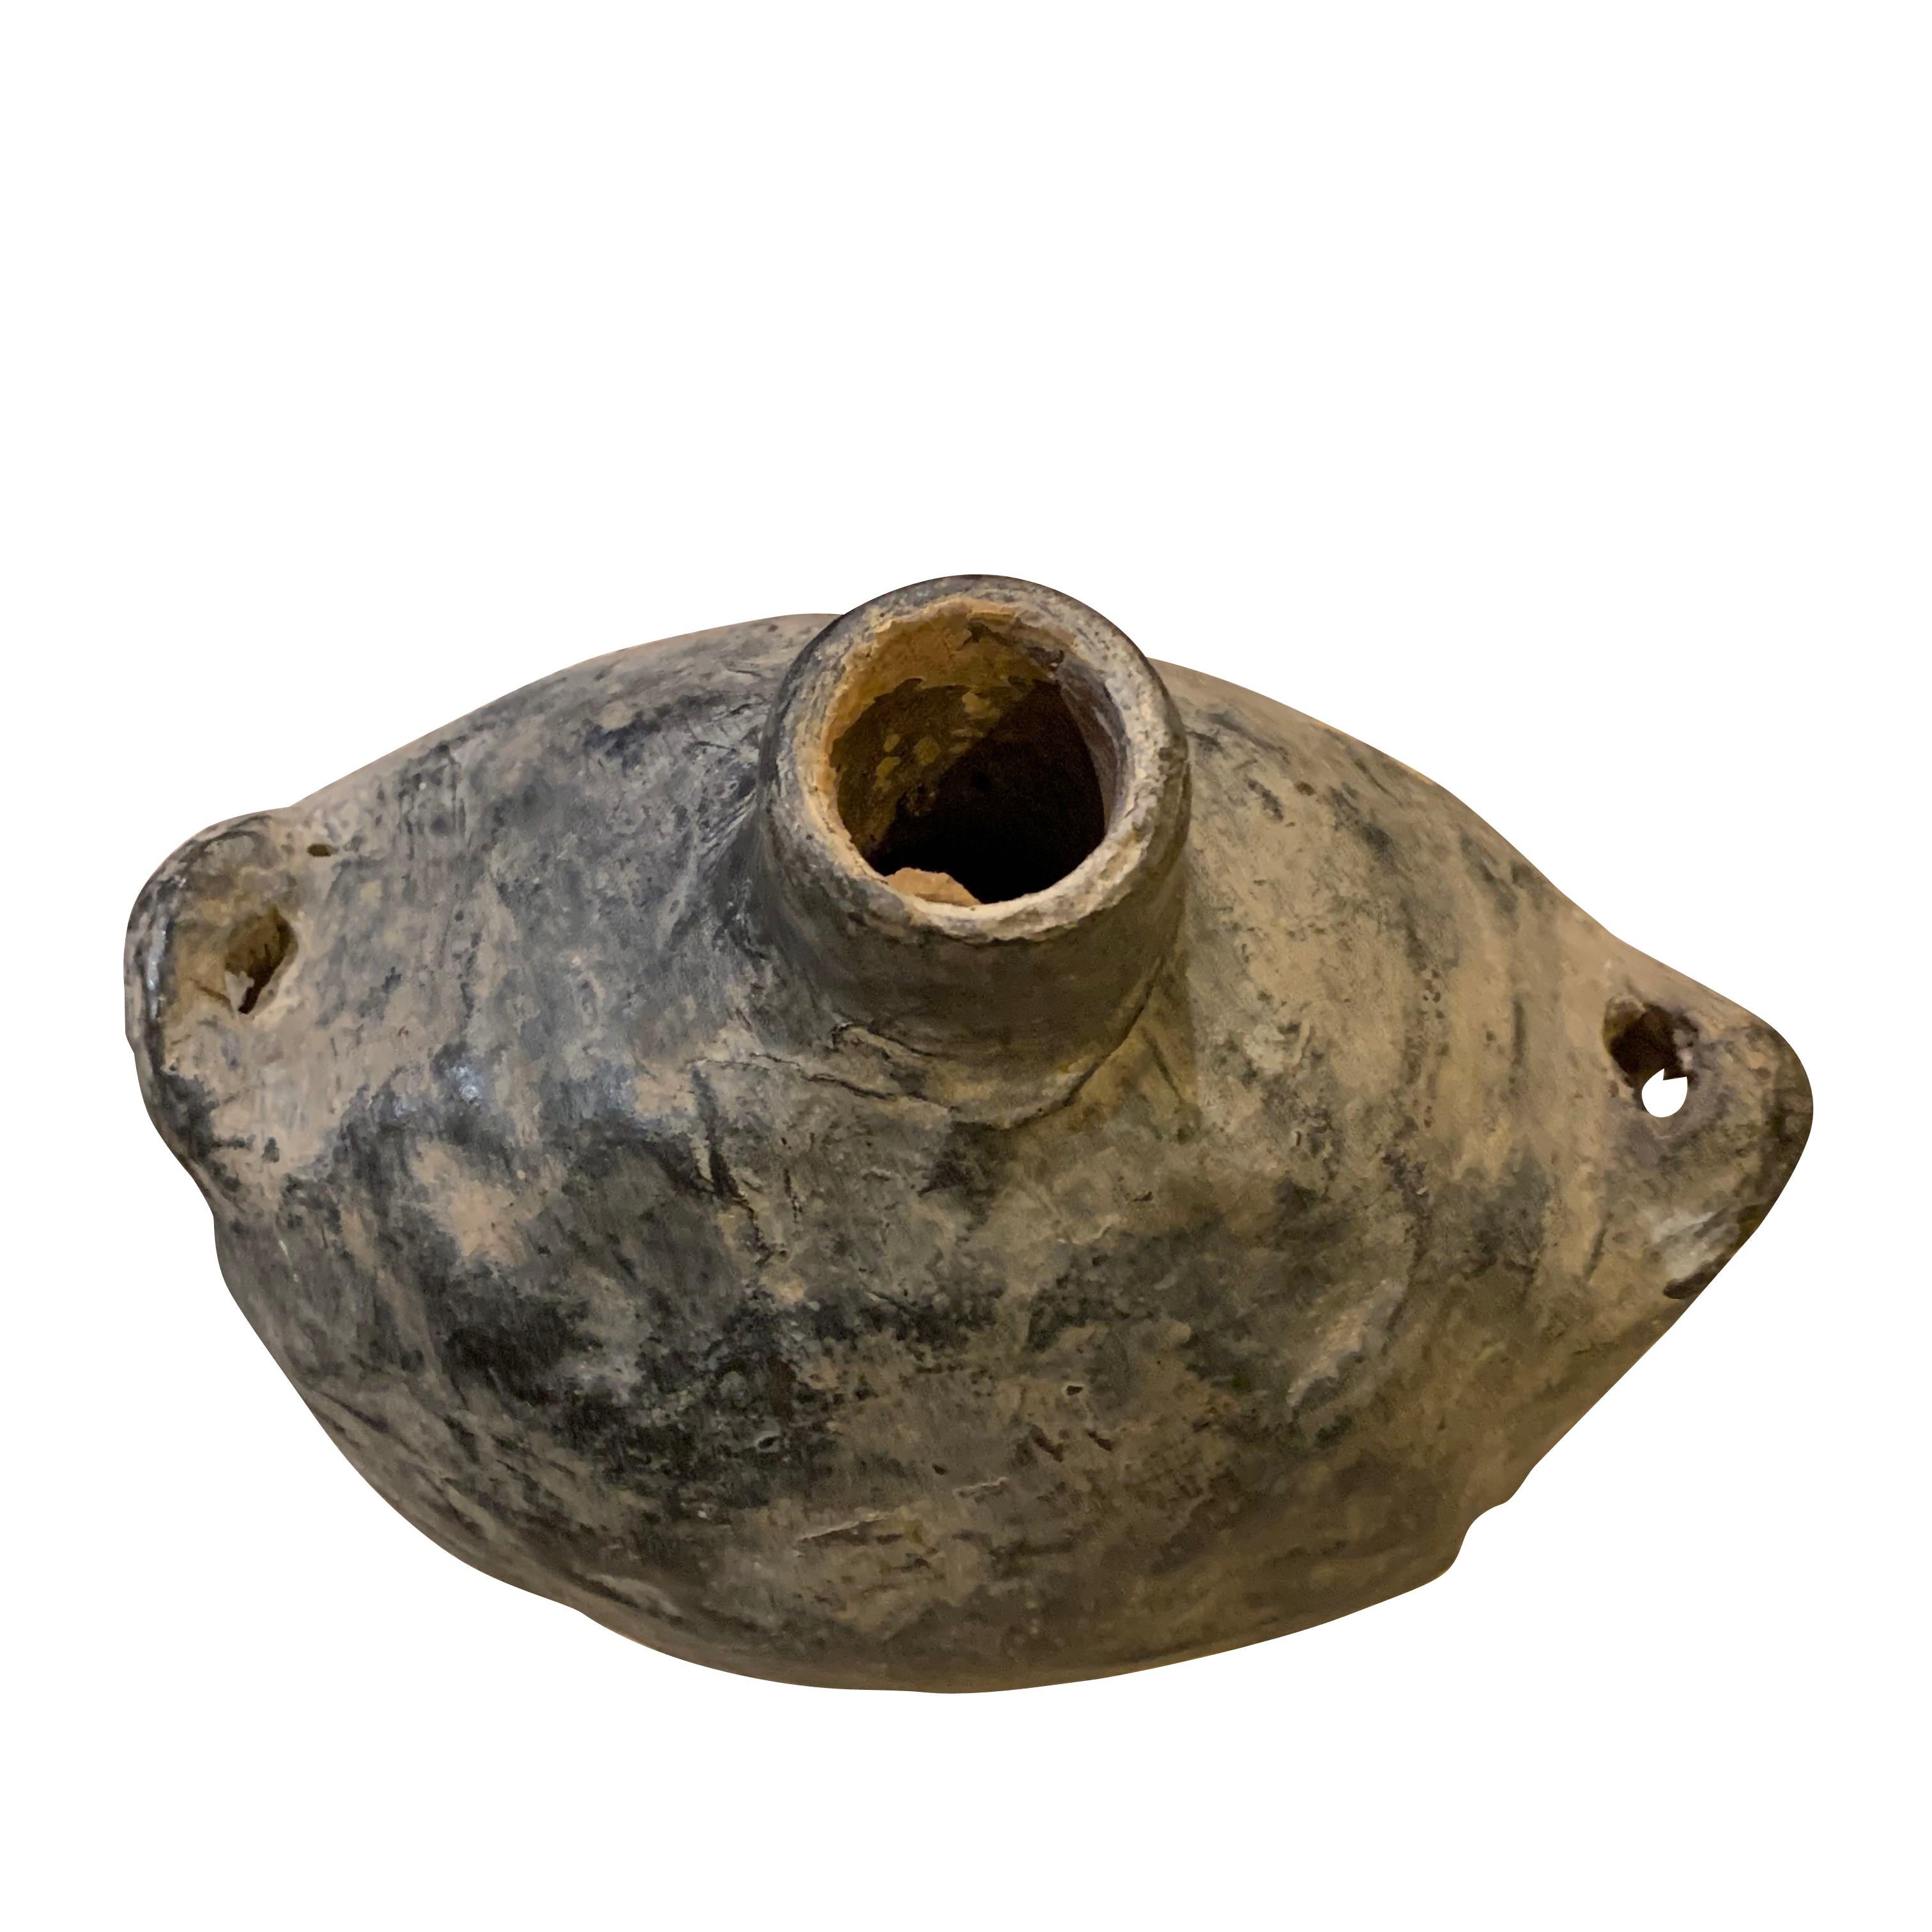 19th century Mongolian flask
Two small handles
Natural aged patina
Three available (S5522 and S5523).
 